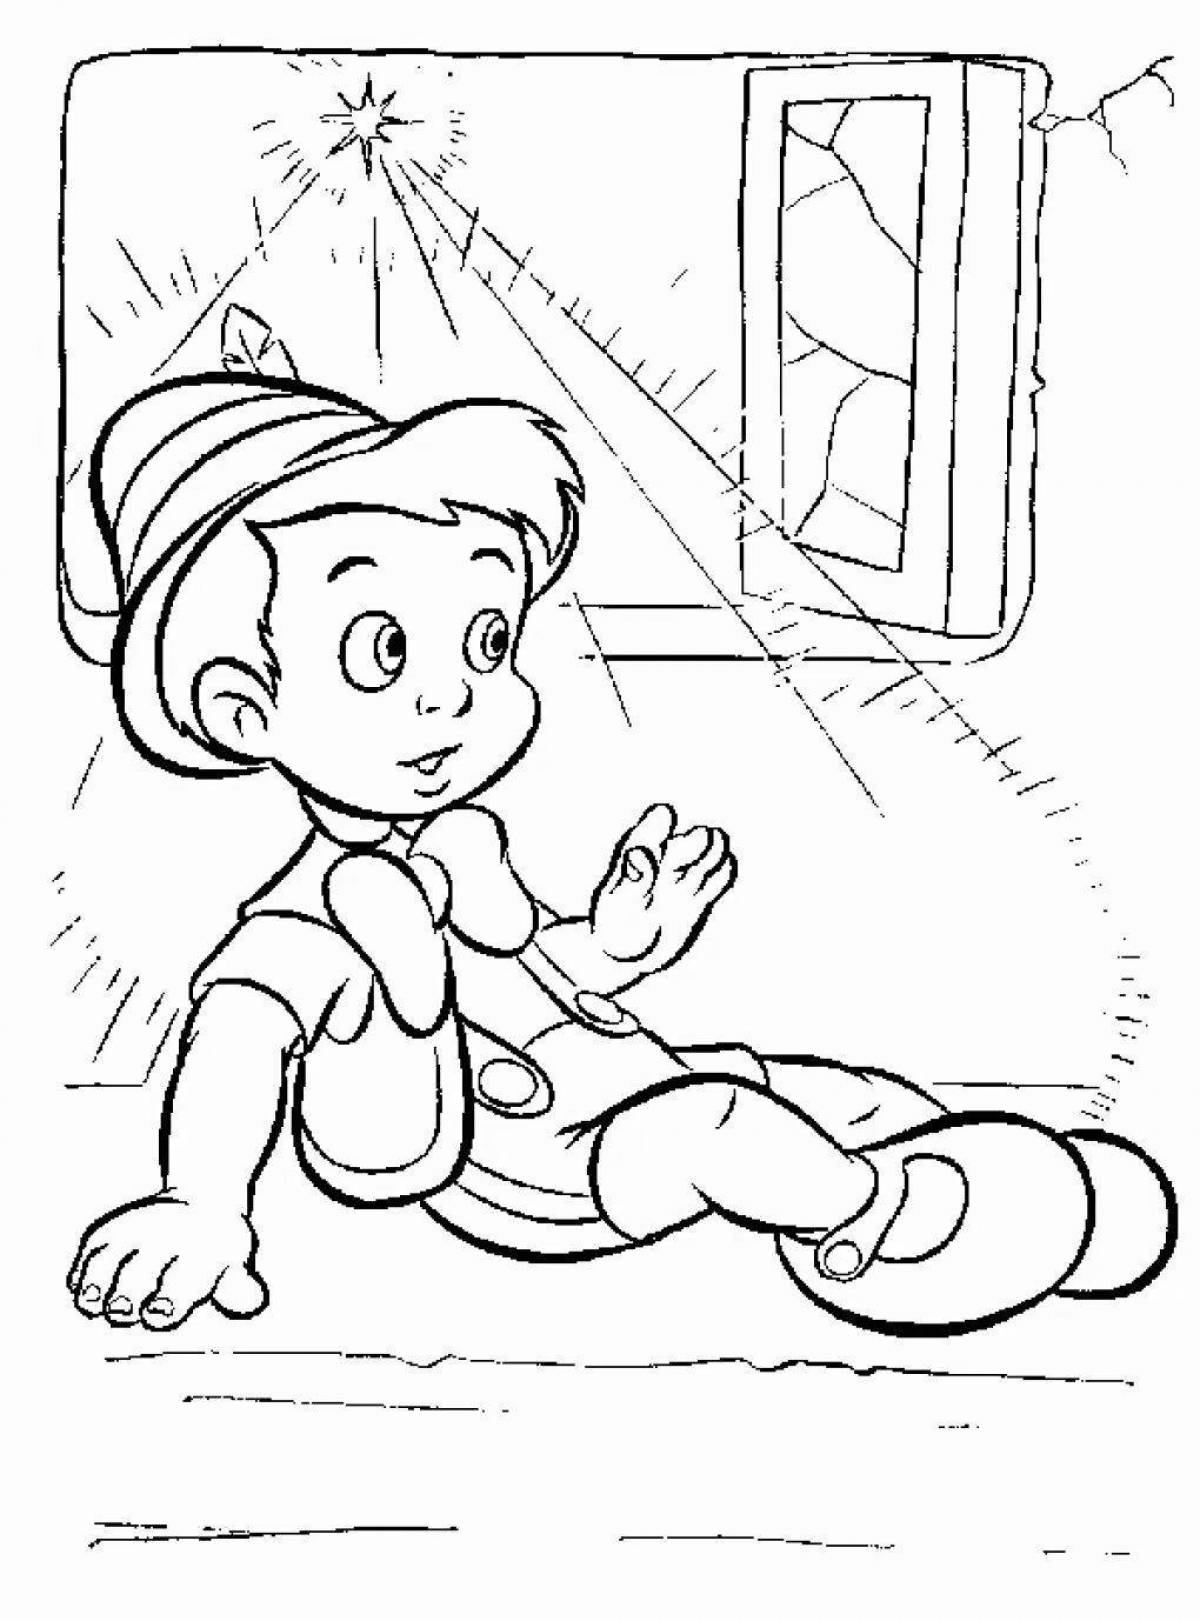 Coloring book glowing little boy